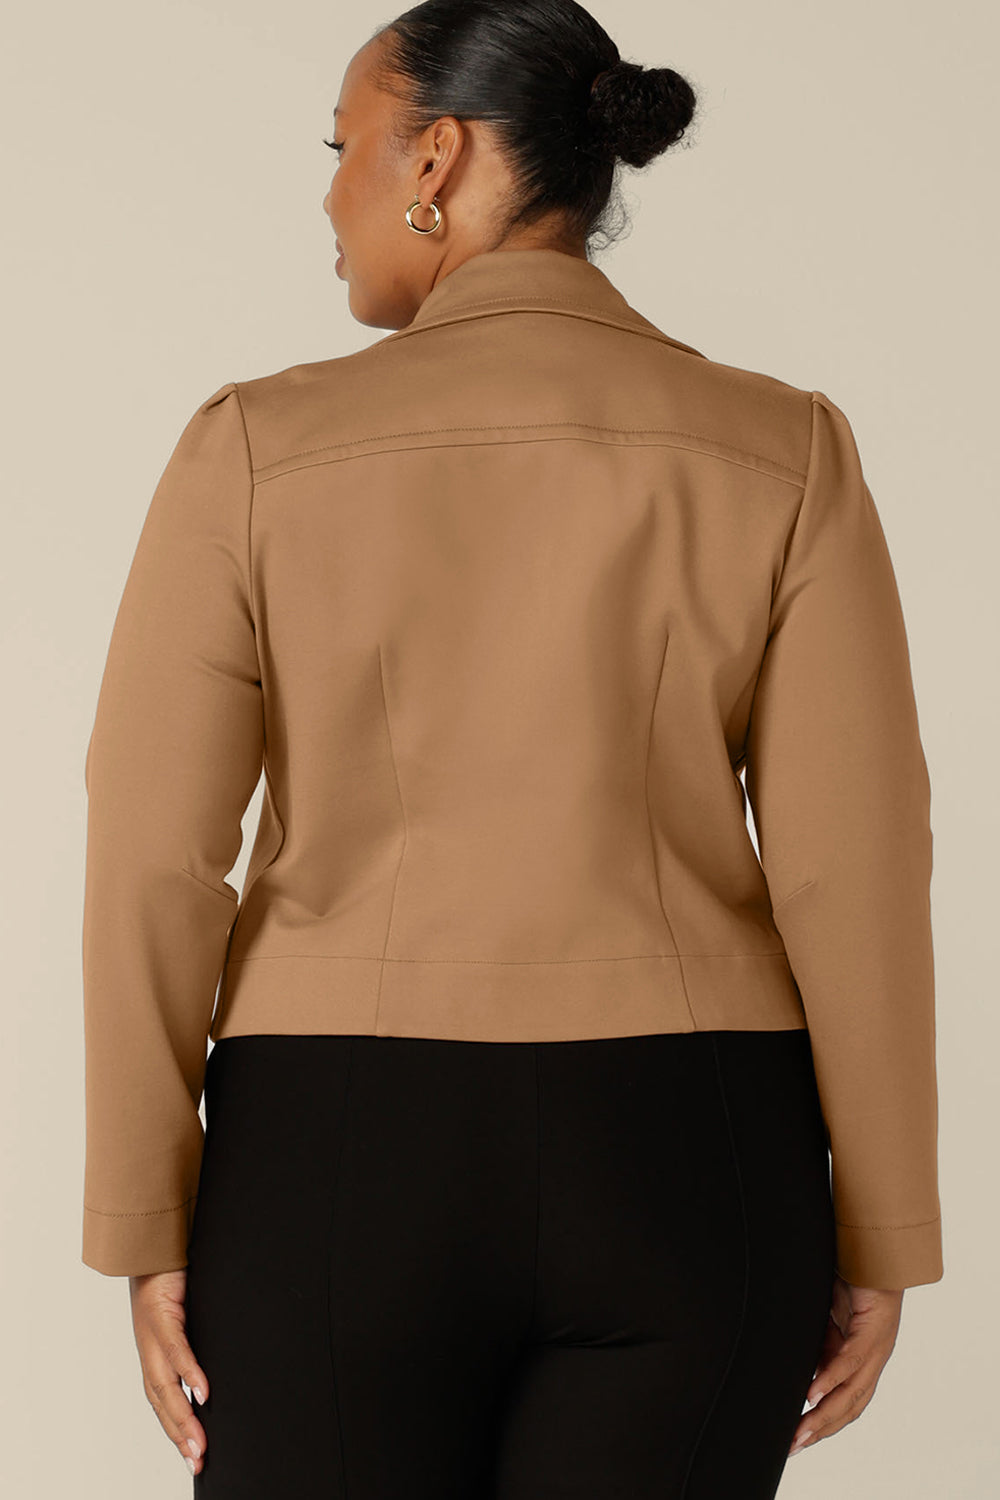 The best jacket for work or casual wear, the Garcia Jacket in Caramel is made in luxury stretch ponte fabric. Open-fronted with full length sleeves and wide collar and lapels, this back view shows the tailored shoulder yokes, darts and gathered sleeveheads that style up this elegant work jacekt.